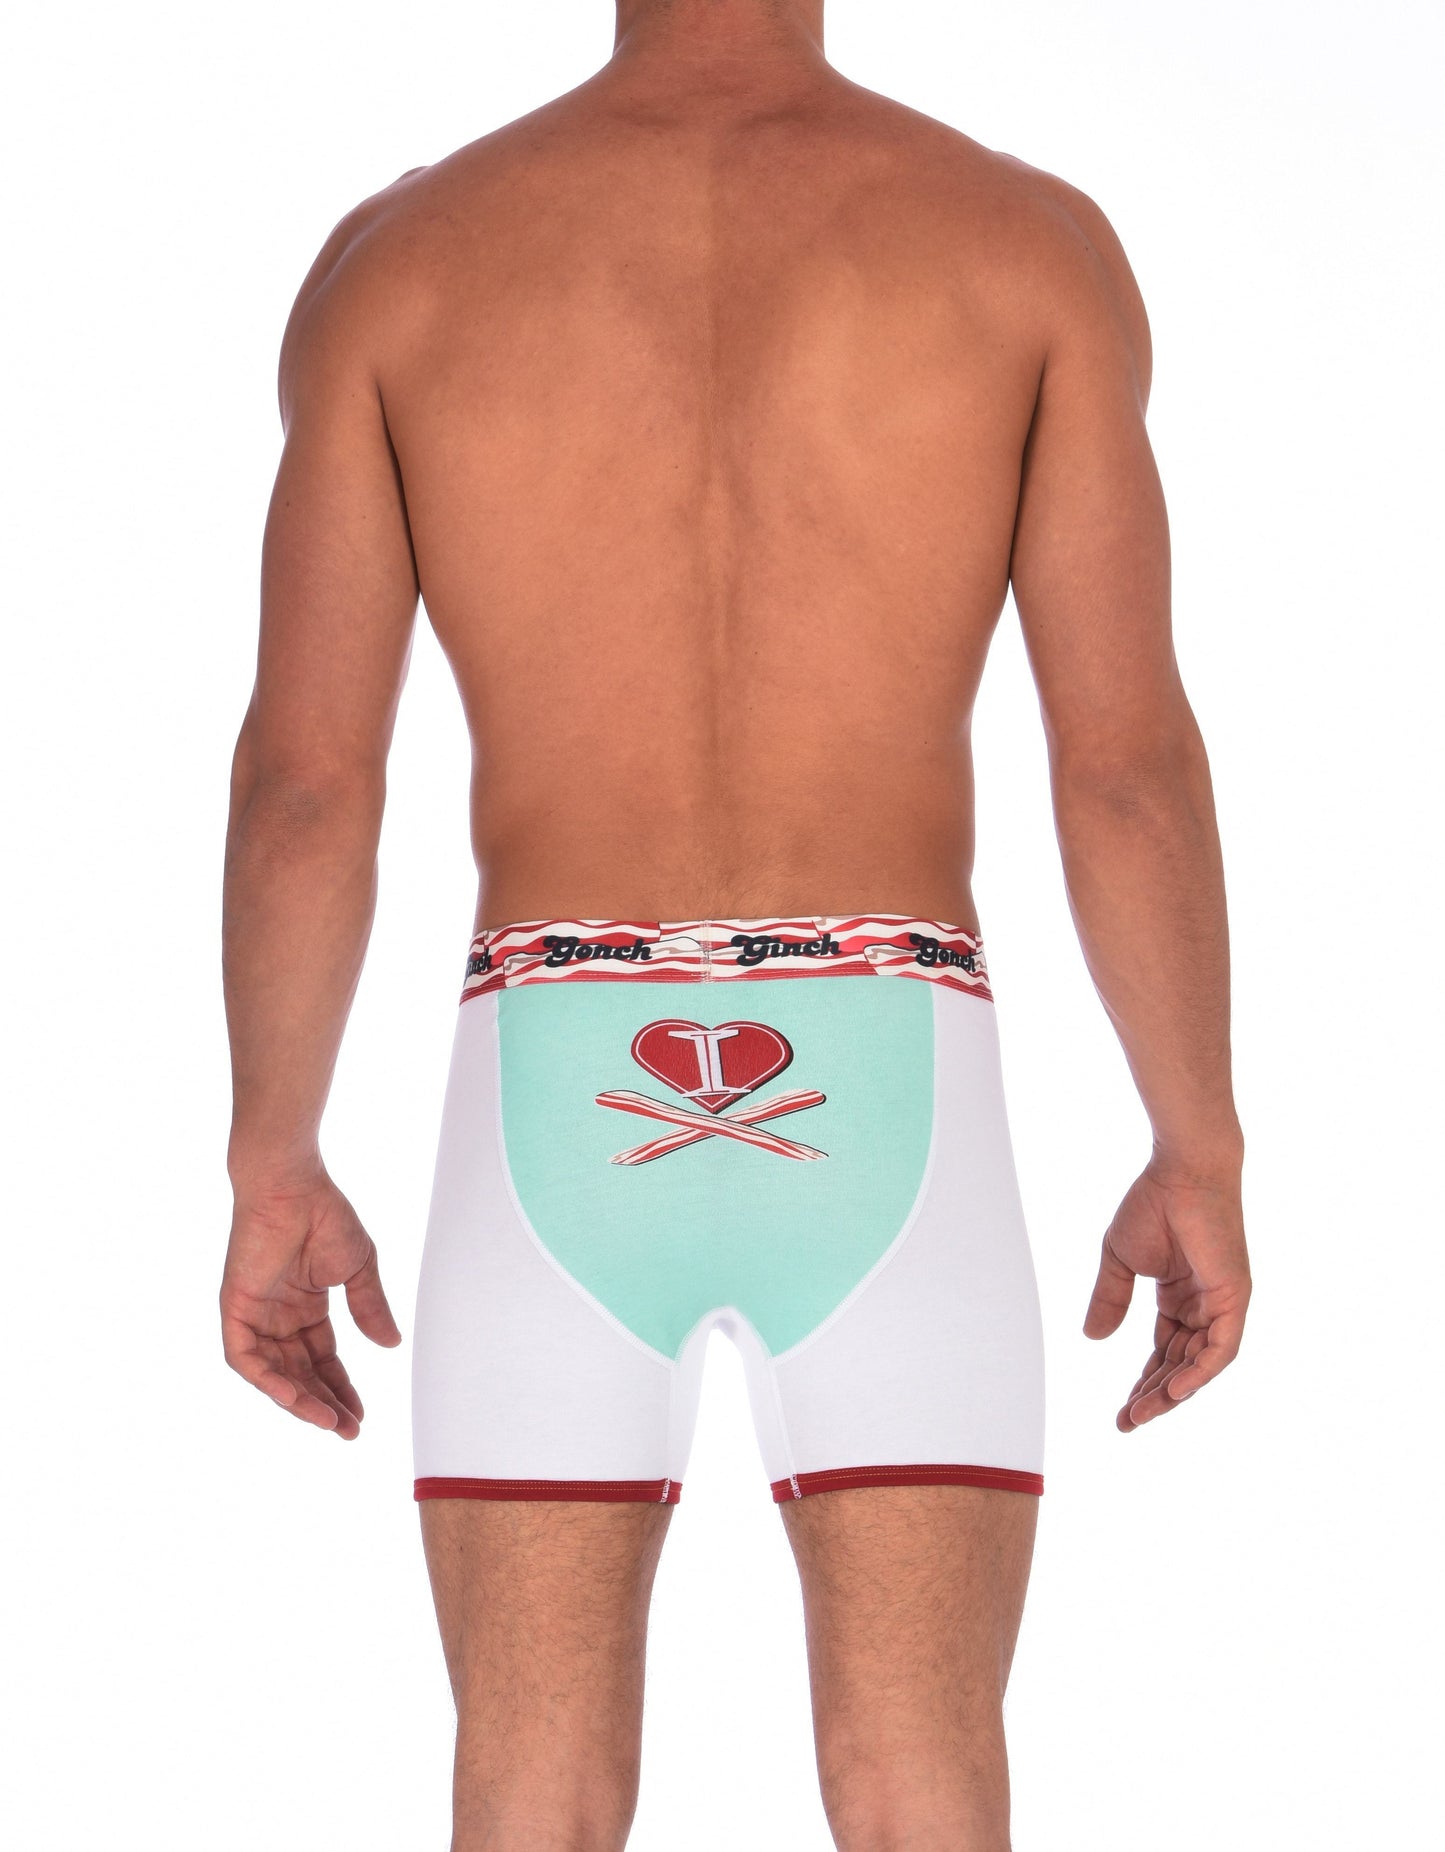 I Love Bacon Boxer Brief Ginch Gonch Men's underwear boxer brief trunk with white teal and bacon detail back